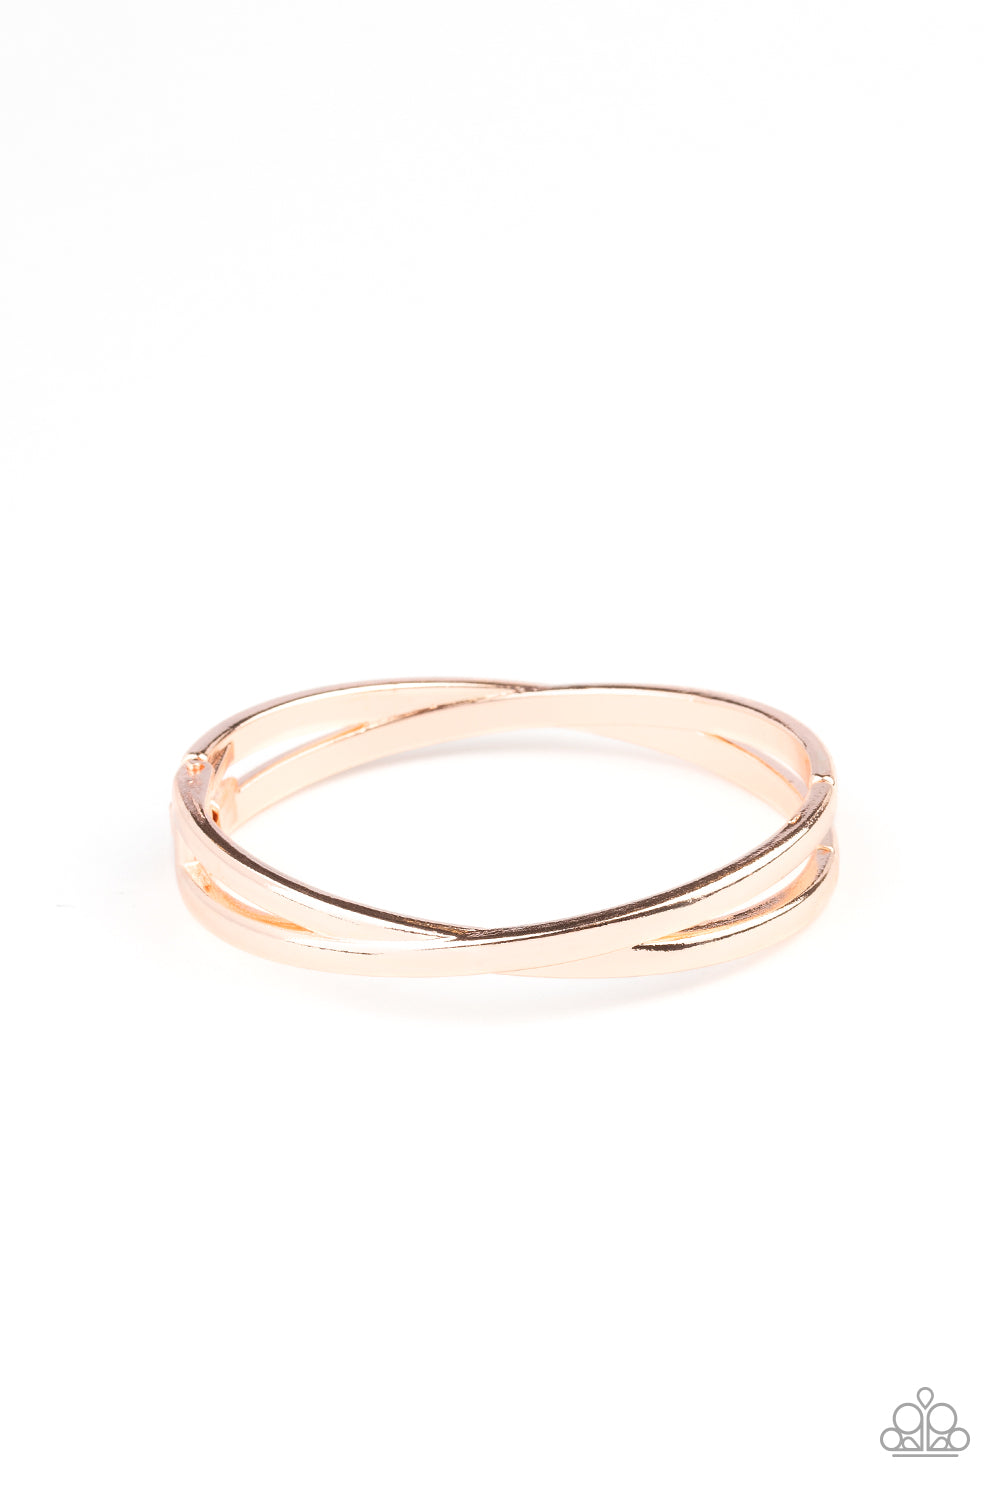 Paparazzi Crossing Over Rose Gold Hinged Cuff Bracelet